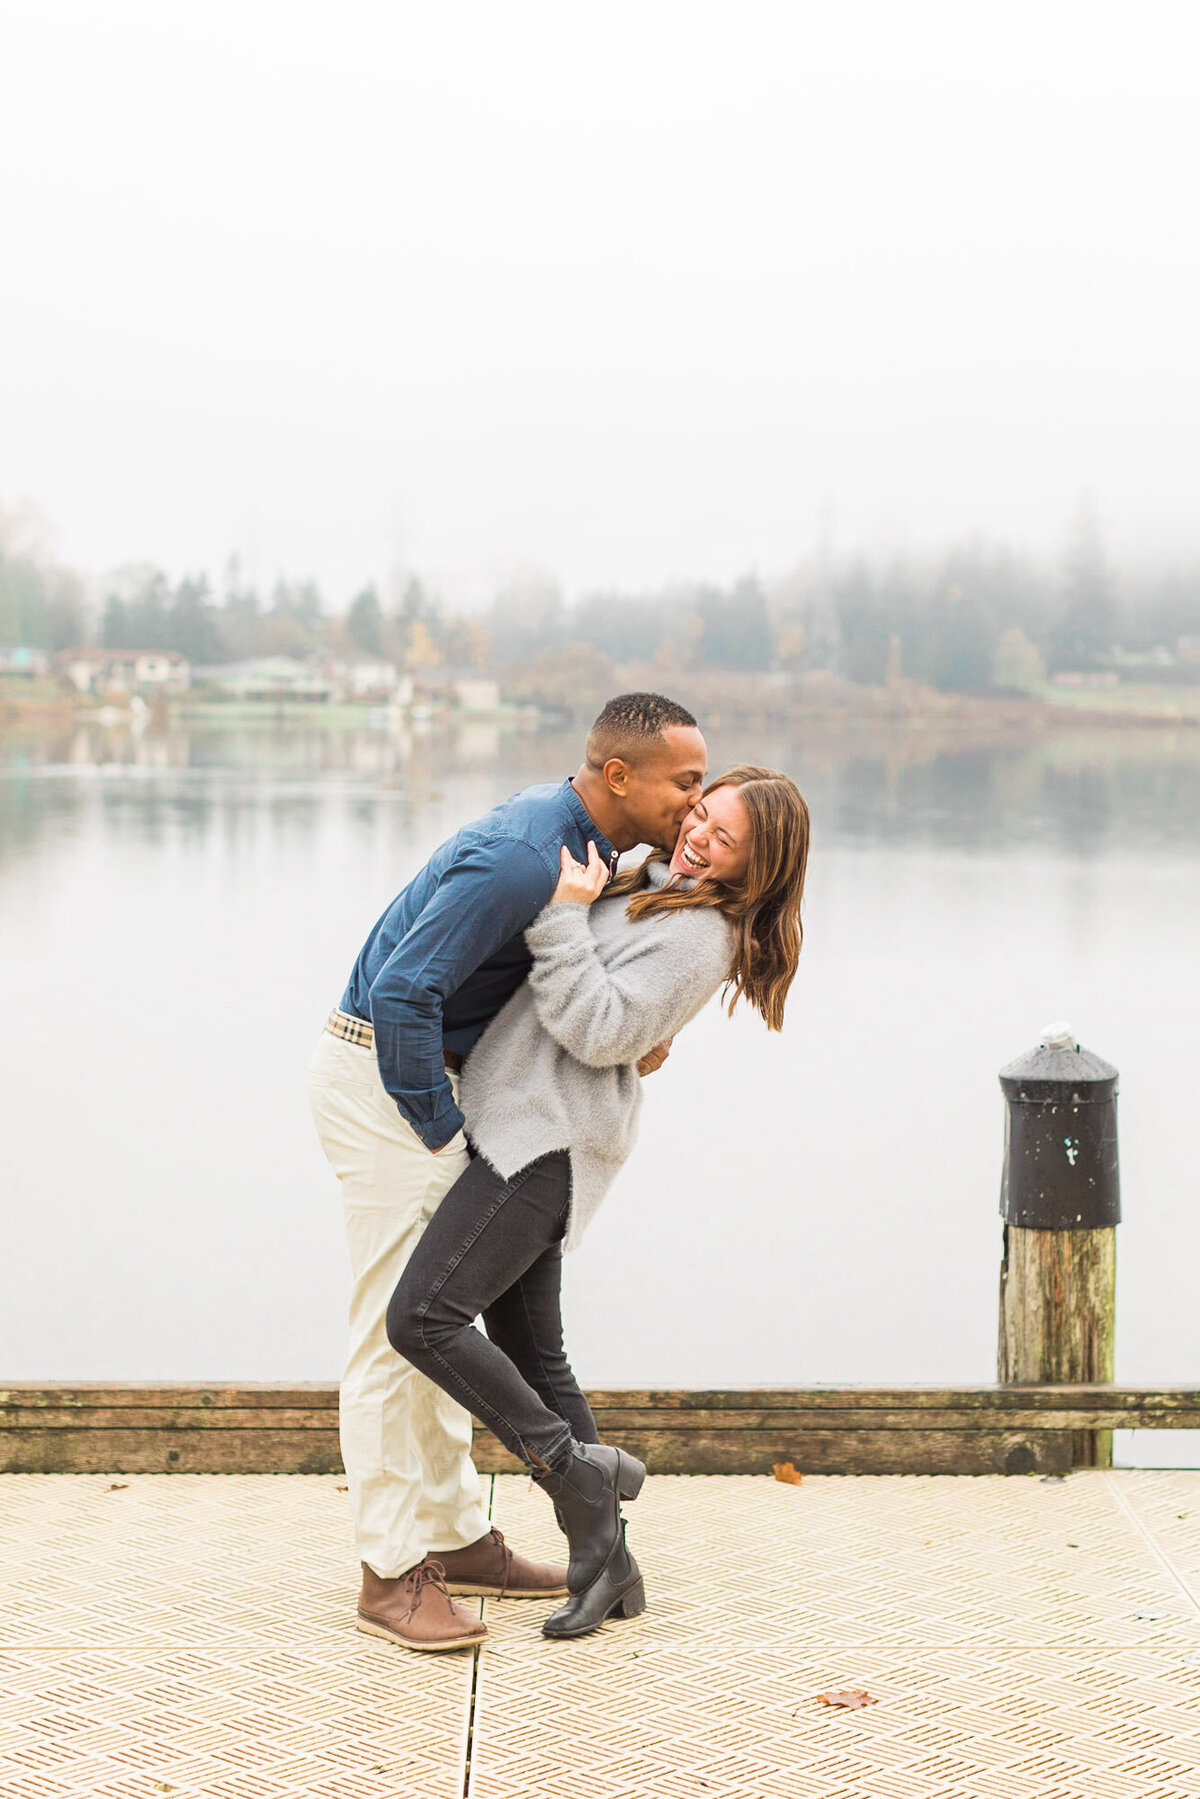 Joyful and fun engagement photos by misty lake in Snohomish WA near Woodinville colorful photograph by Joanna Monger Photography